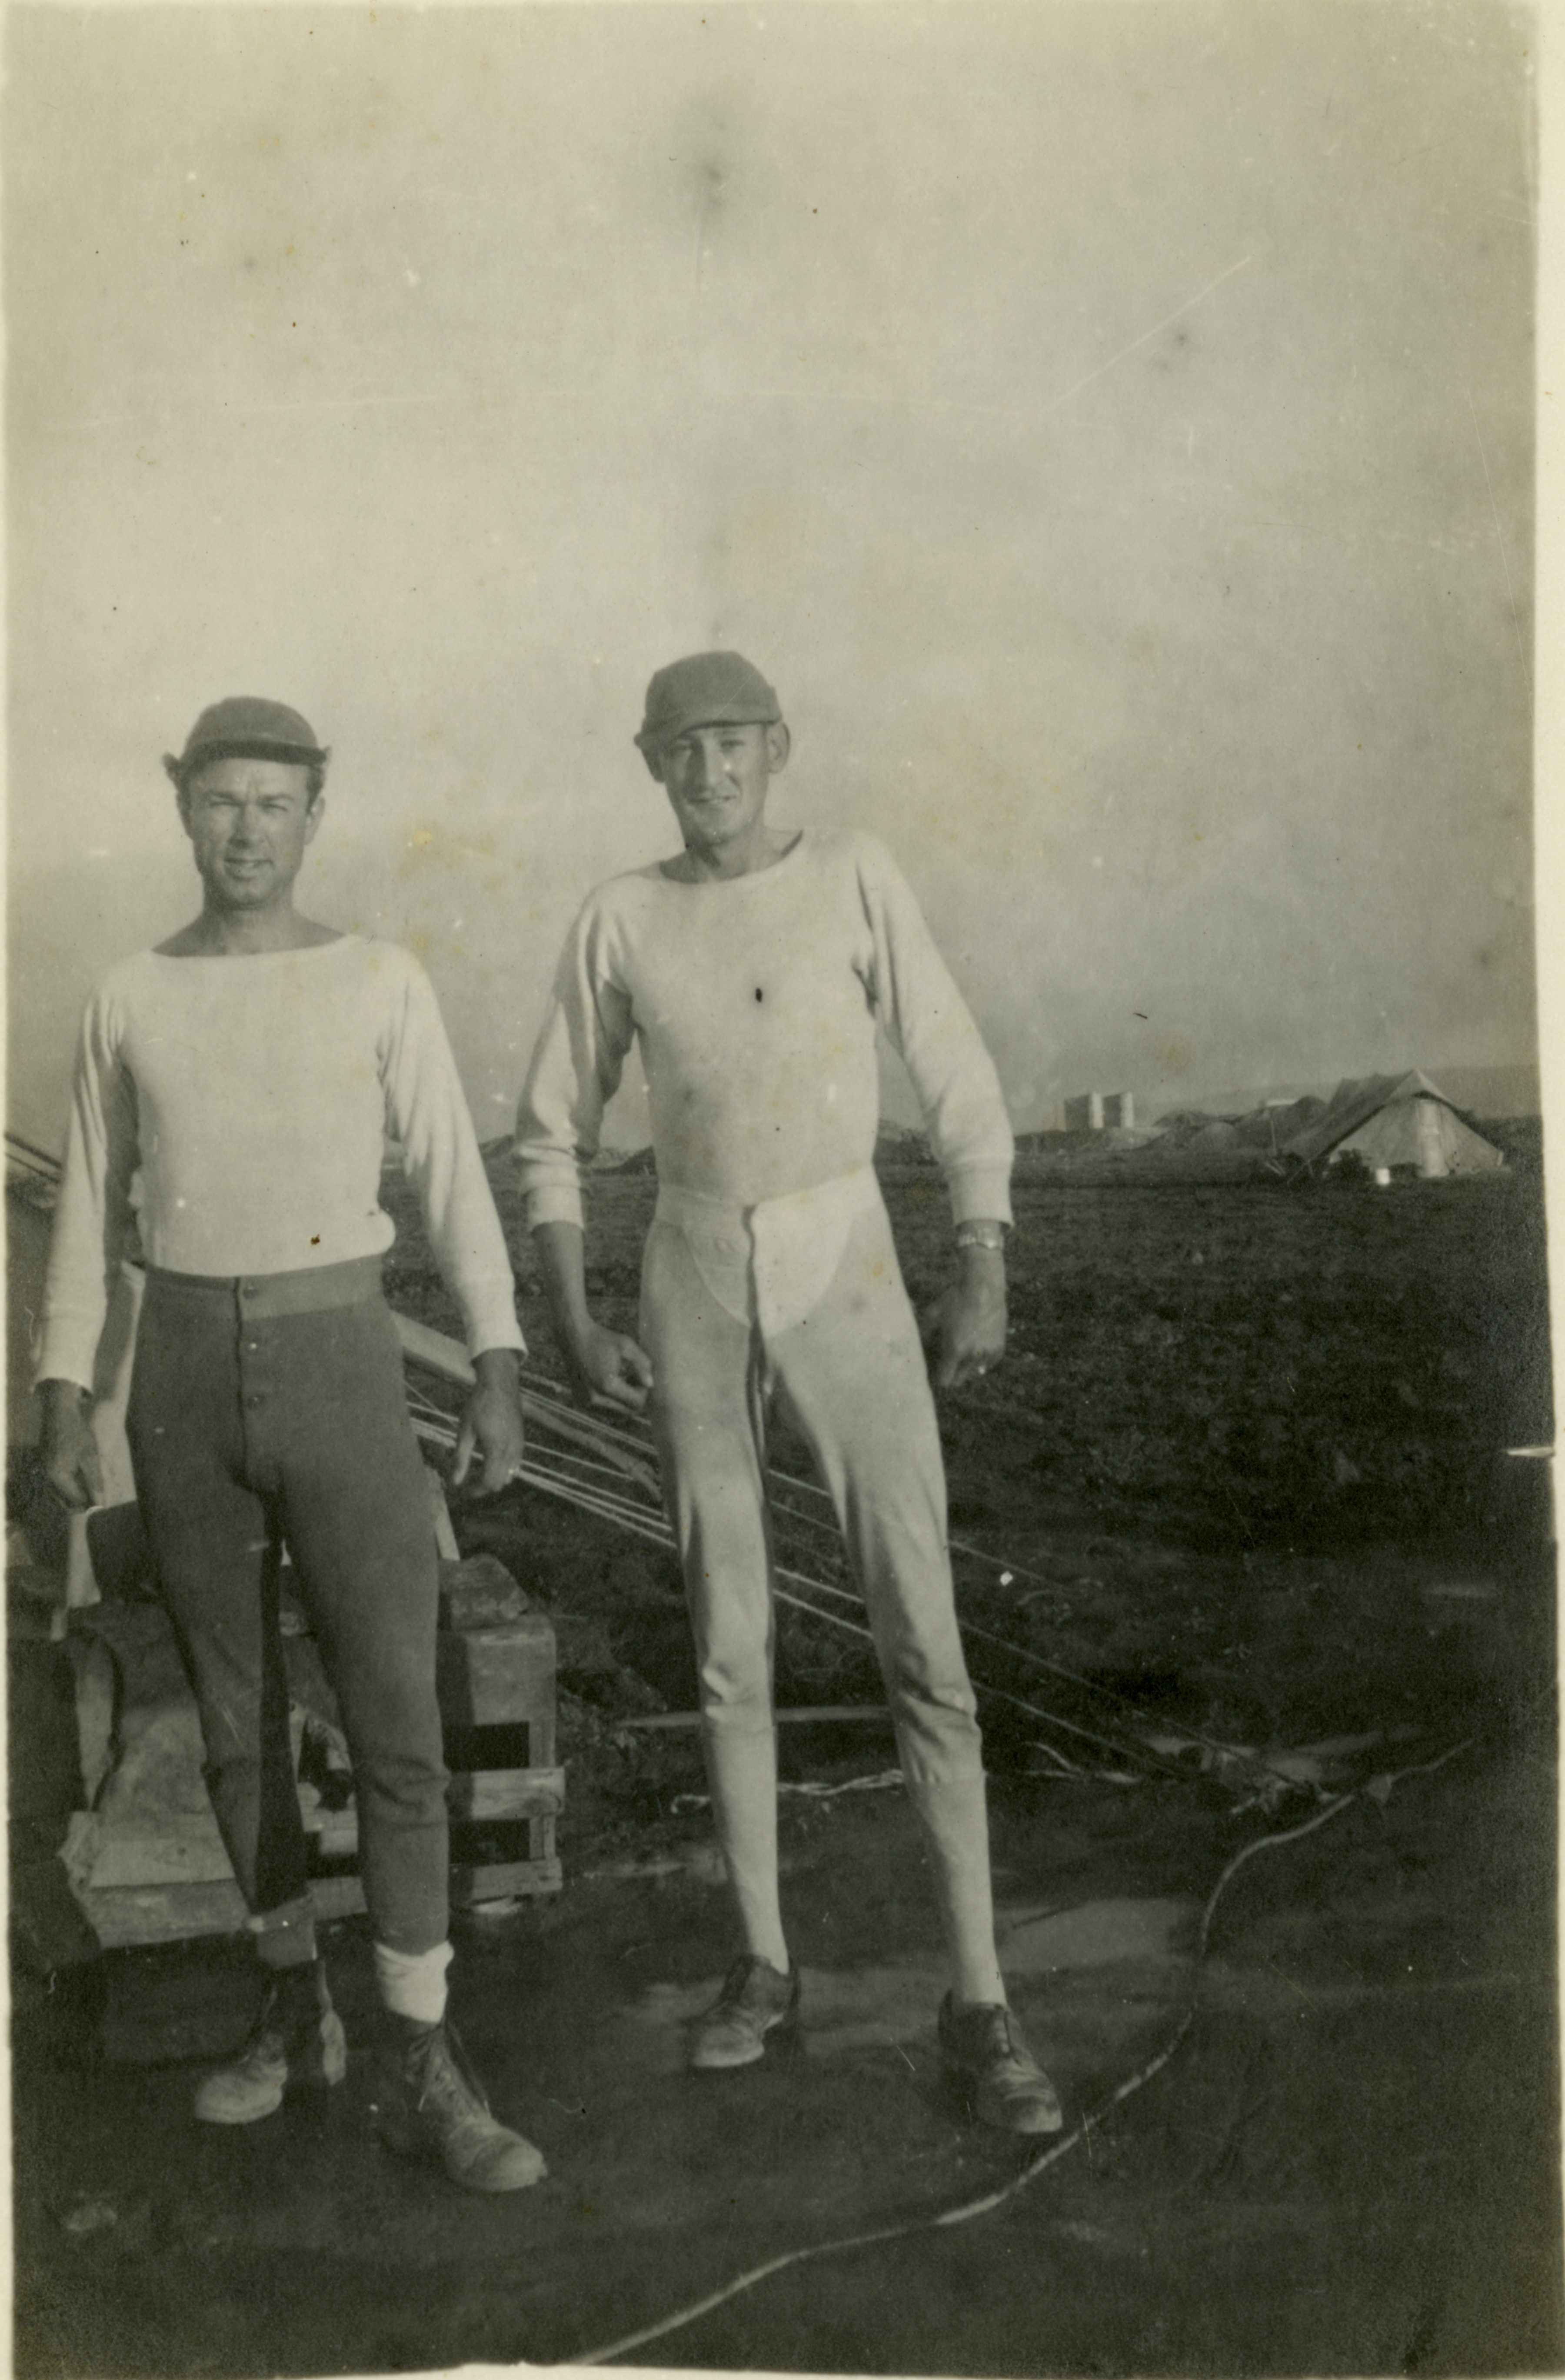 United States servicemen Harm and Kinney in long underwear